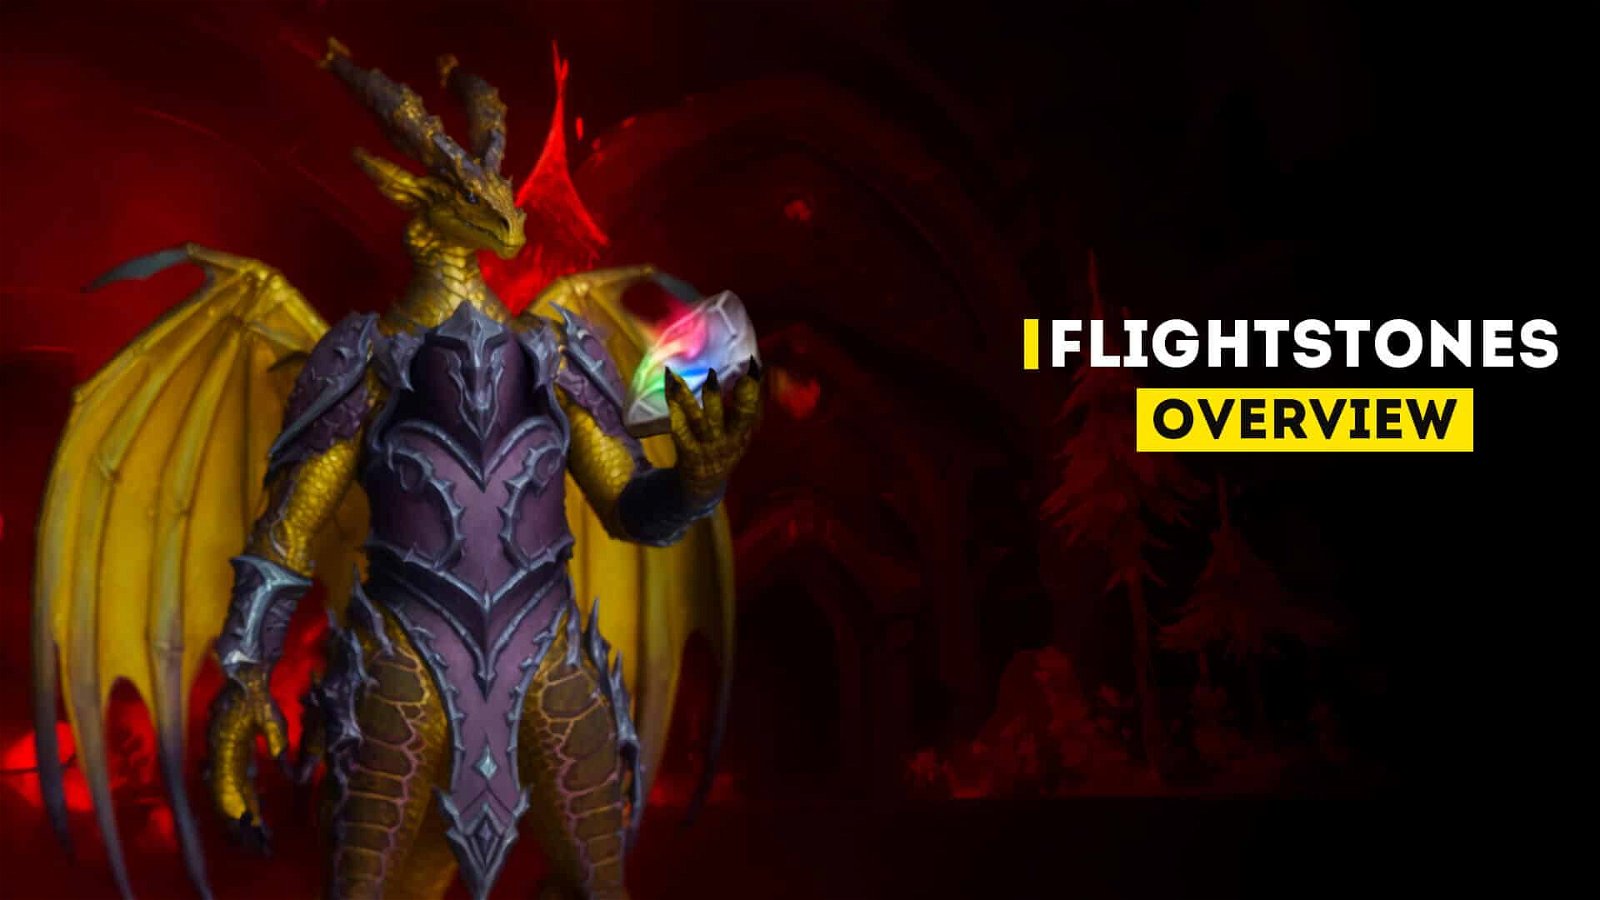 Flightstones In WoW Dragonflight: How To Get And Use - Epiccarry